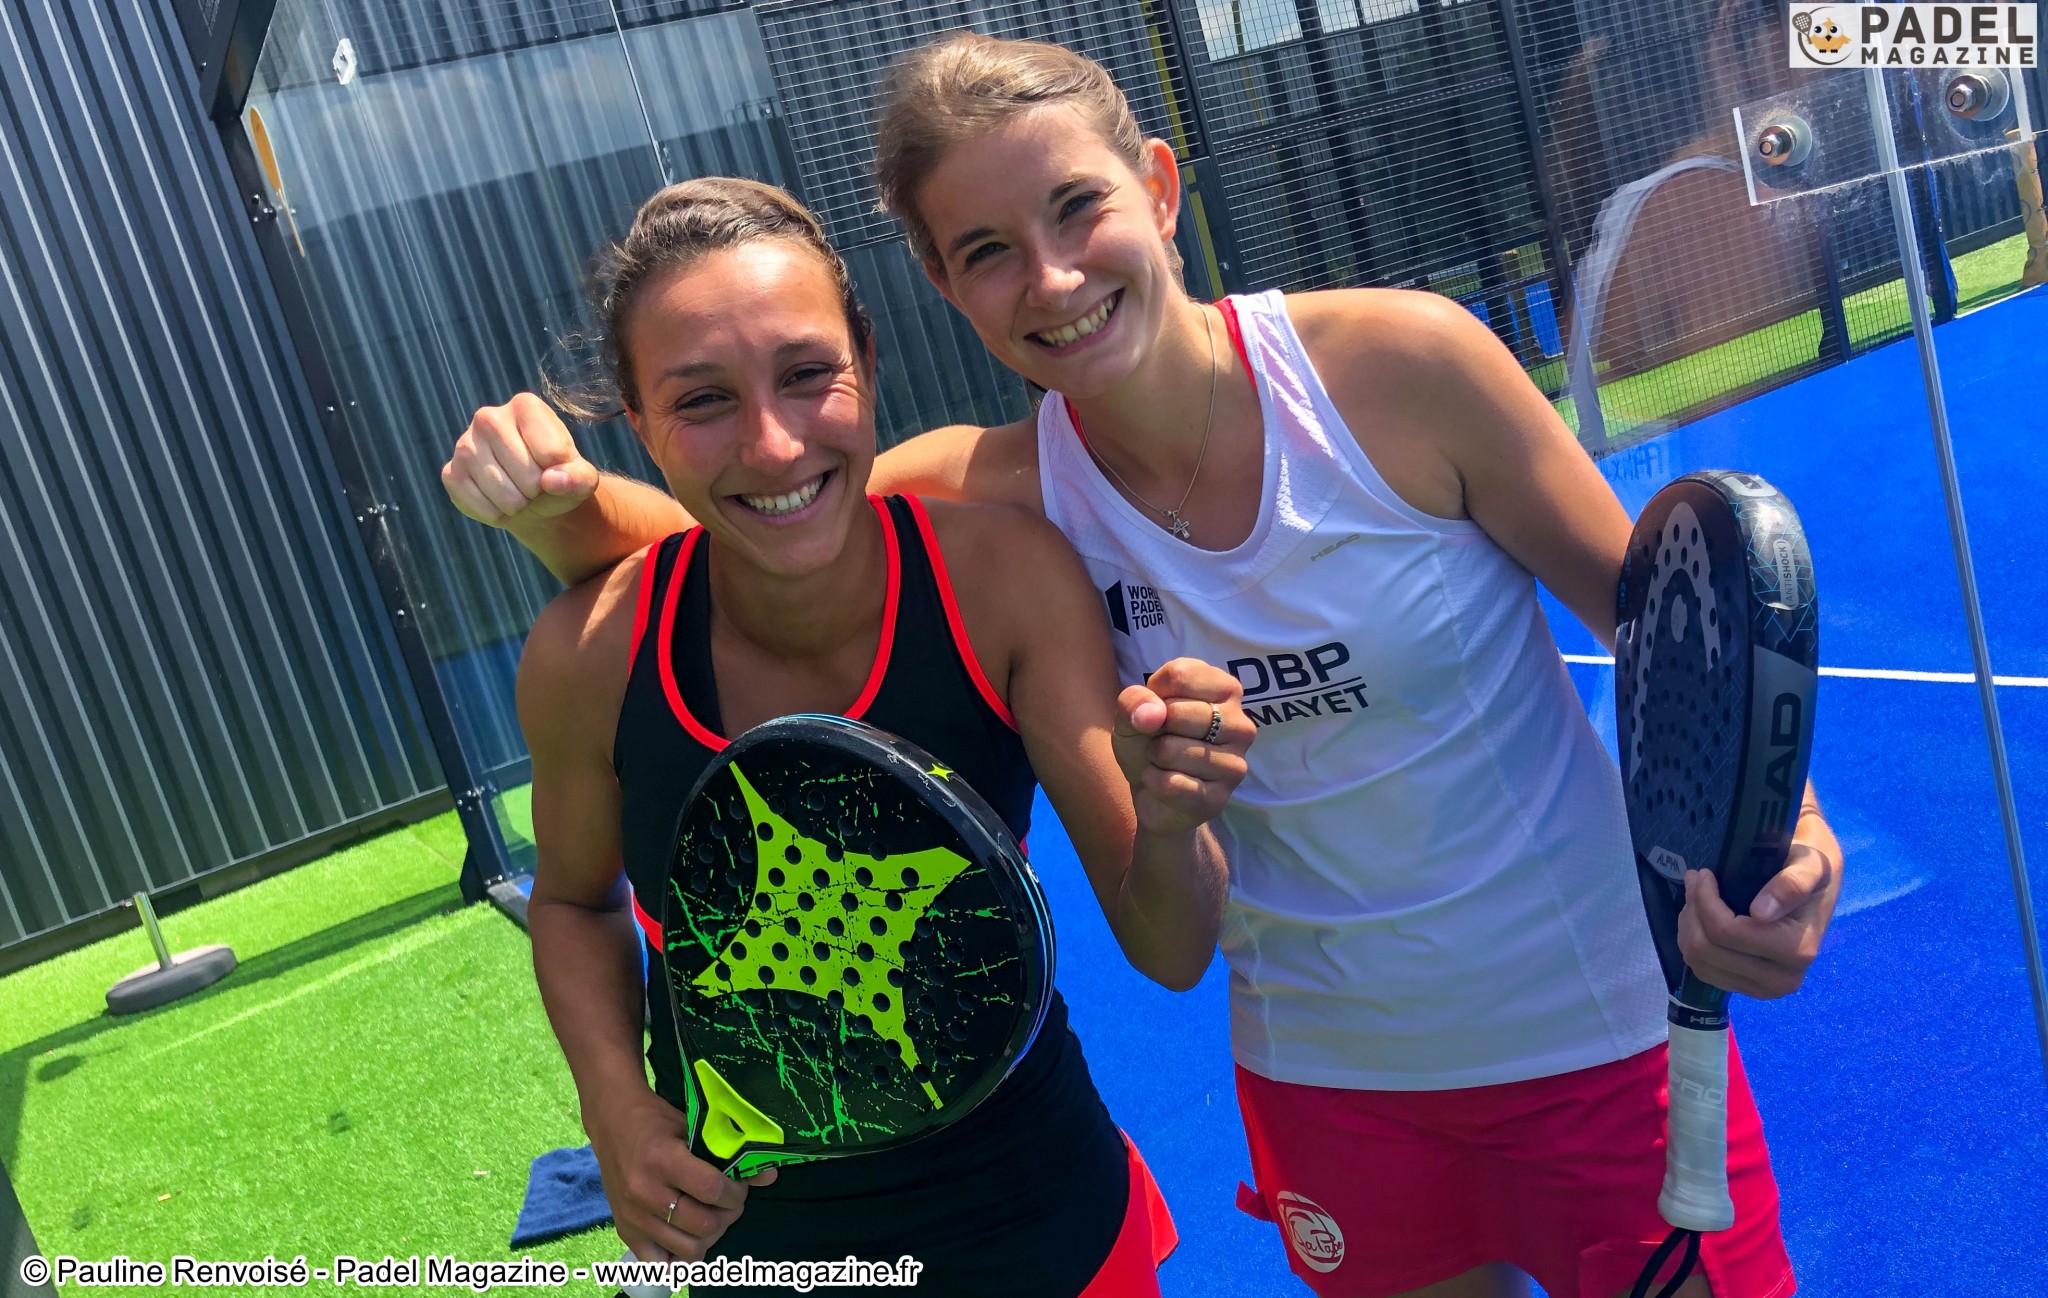 FFT Padel Tour Lyon – Interview with the winners Alix Collombon and Jessica Ginier